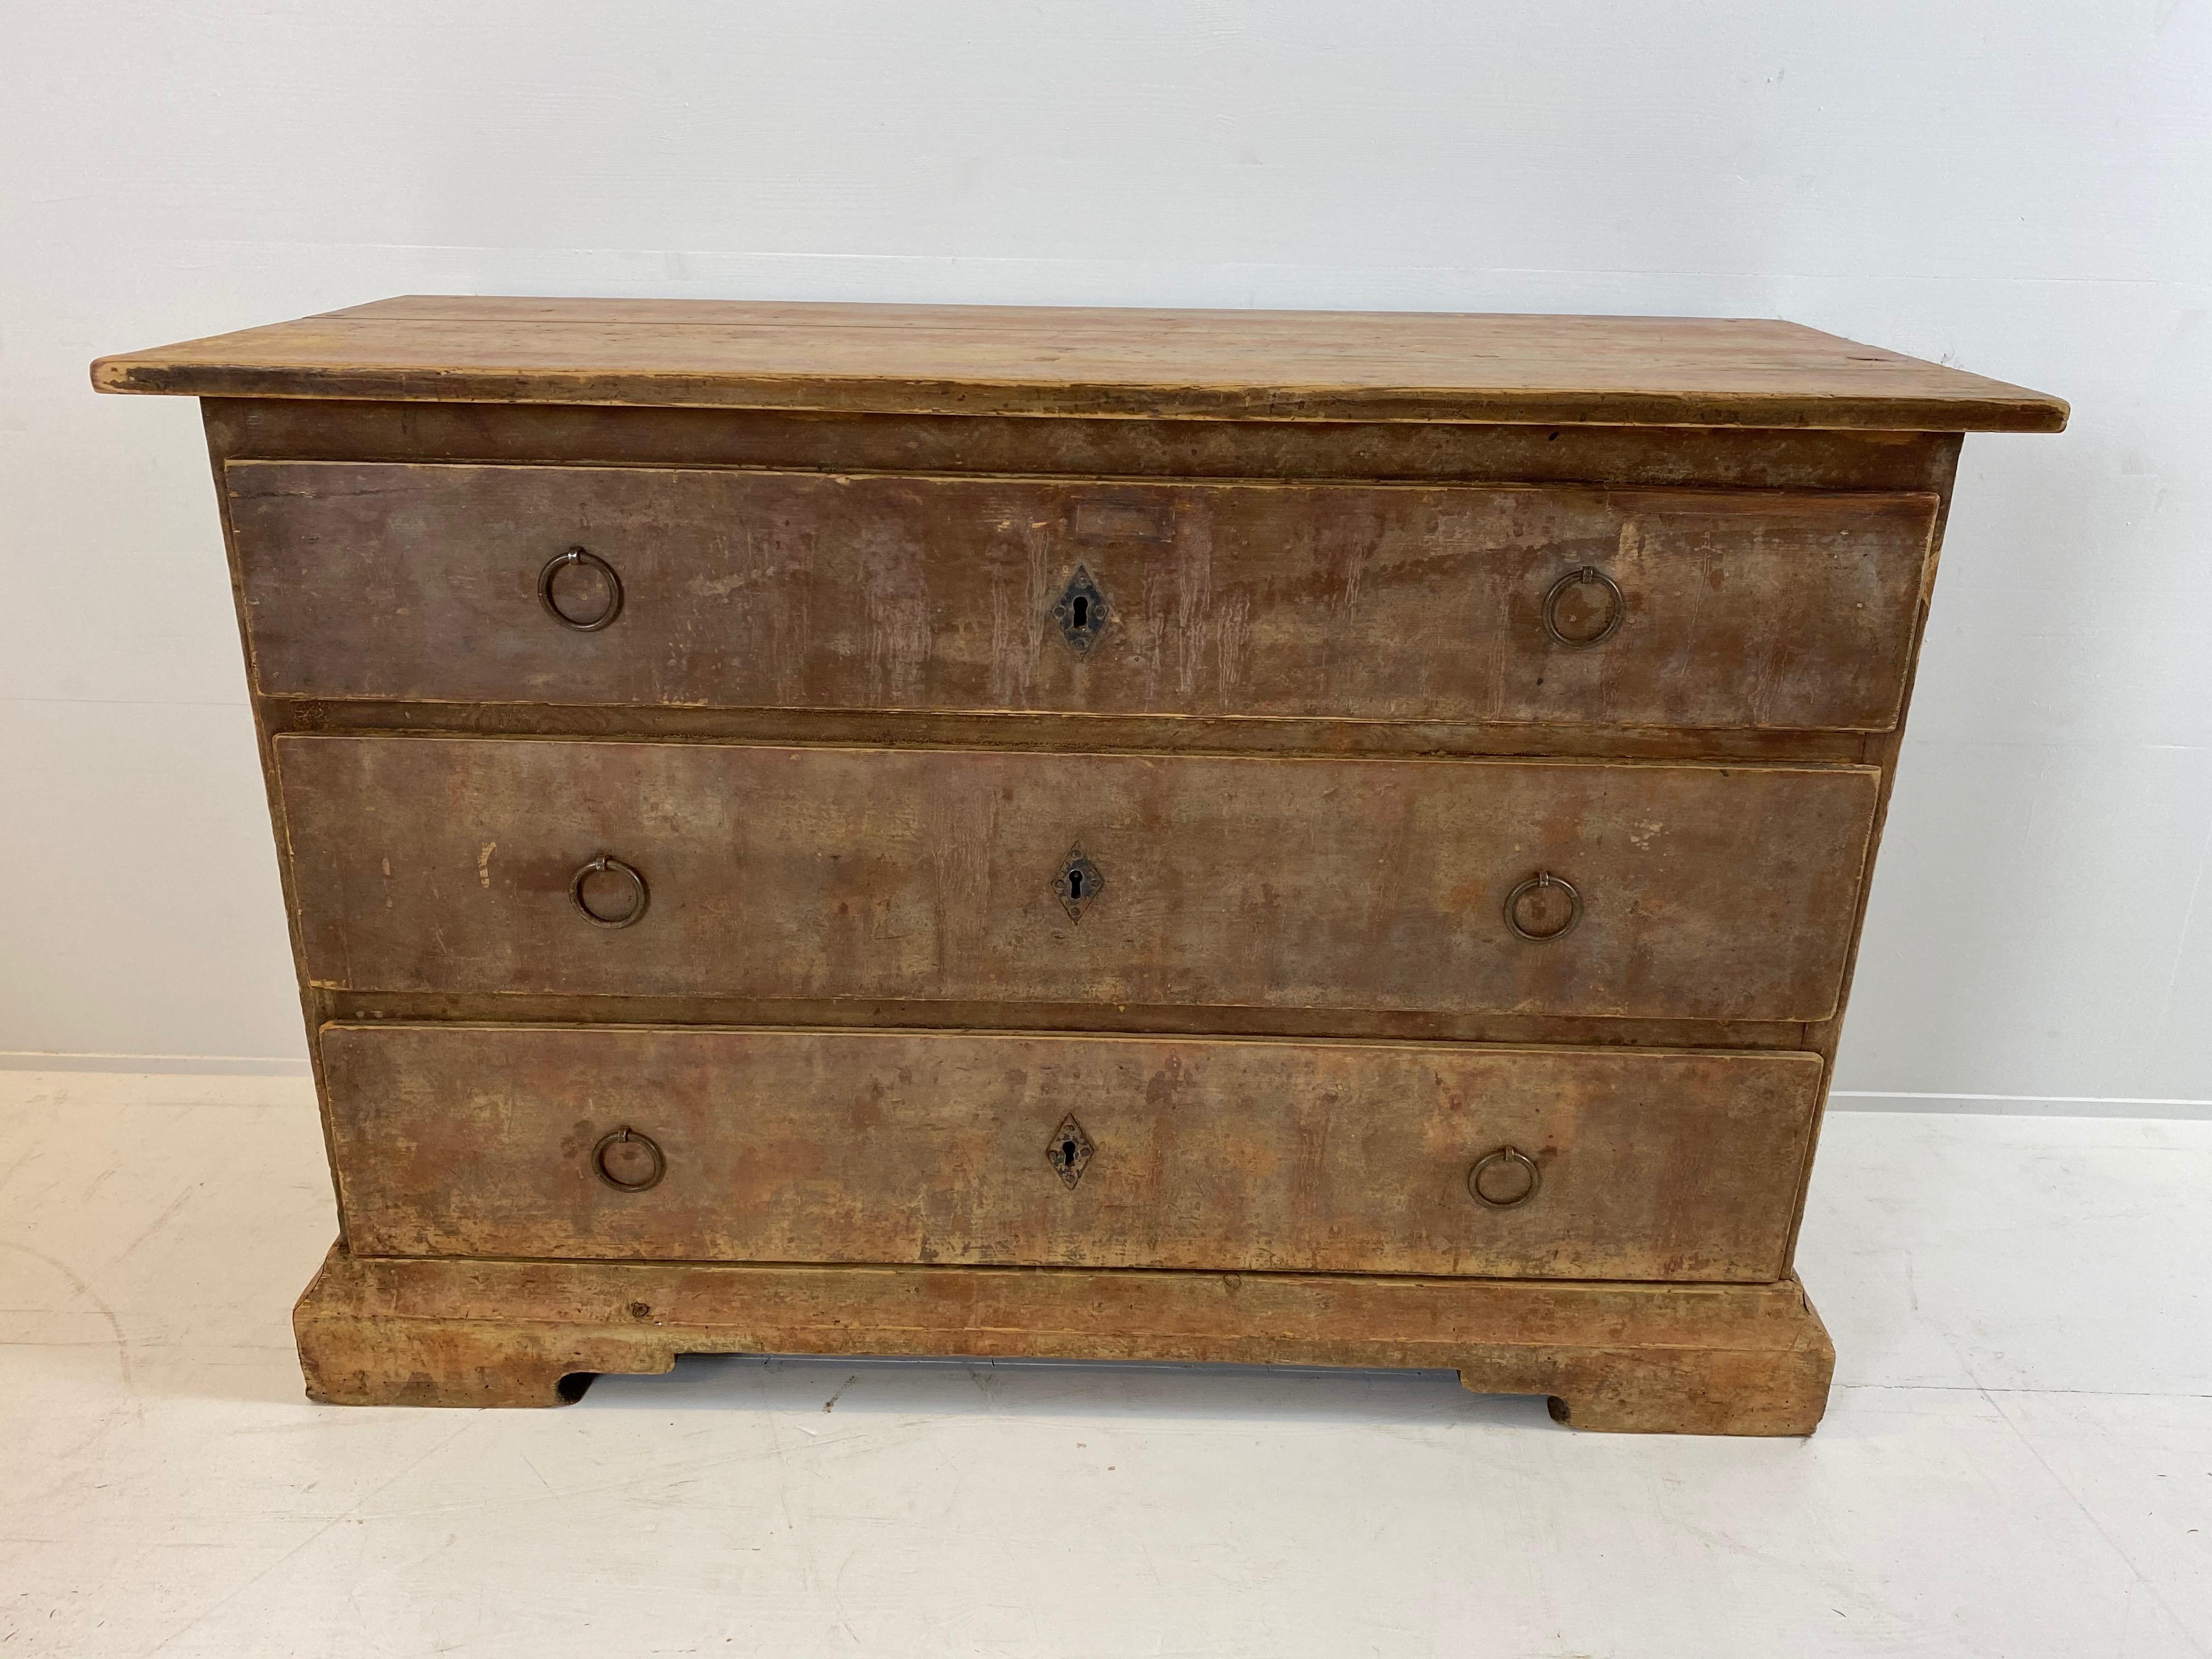 Very elegant and sober chest of drawers, Sweden, 19th Century, 3 drawers
the bleached pine has a very good patina.